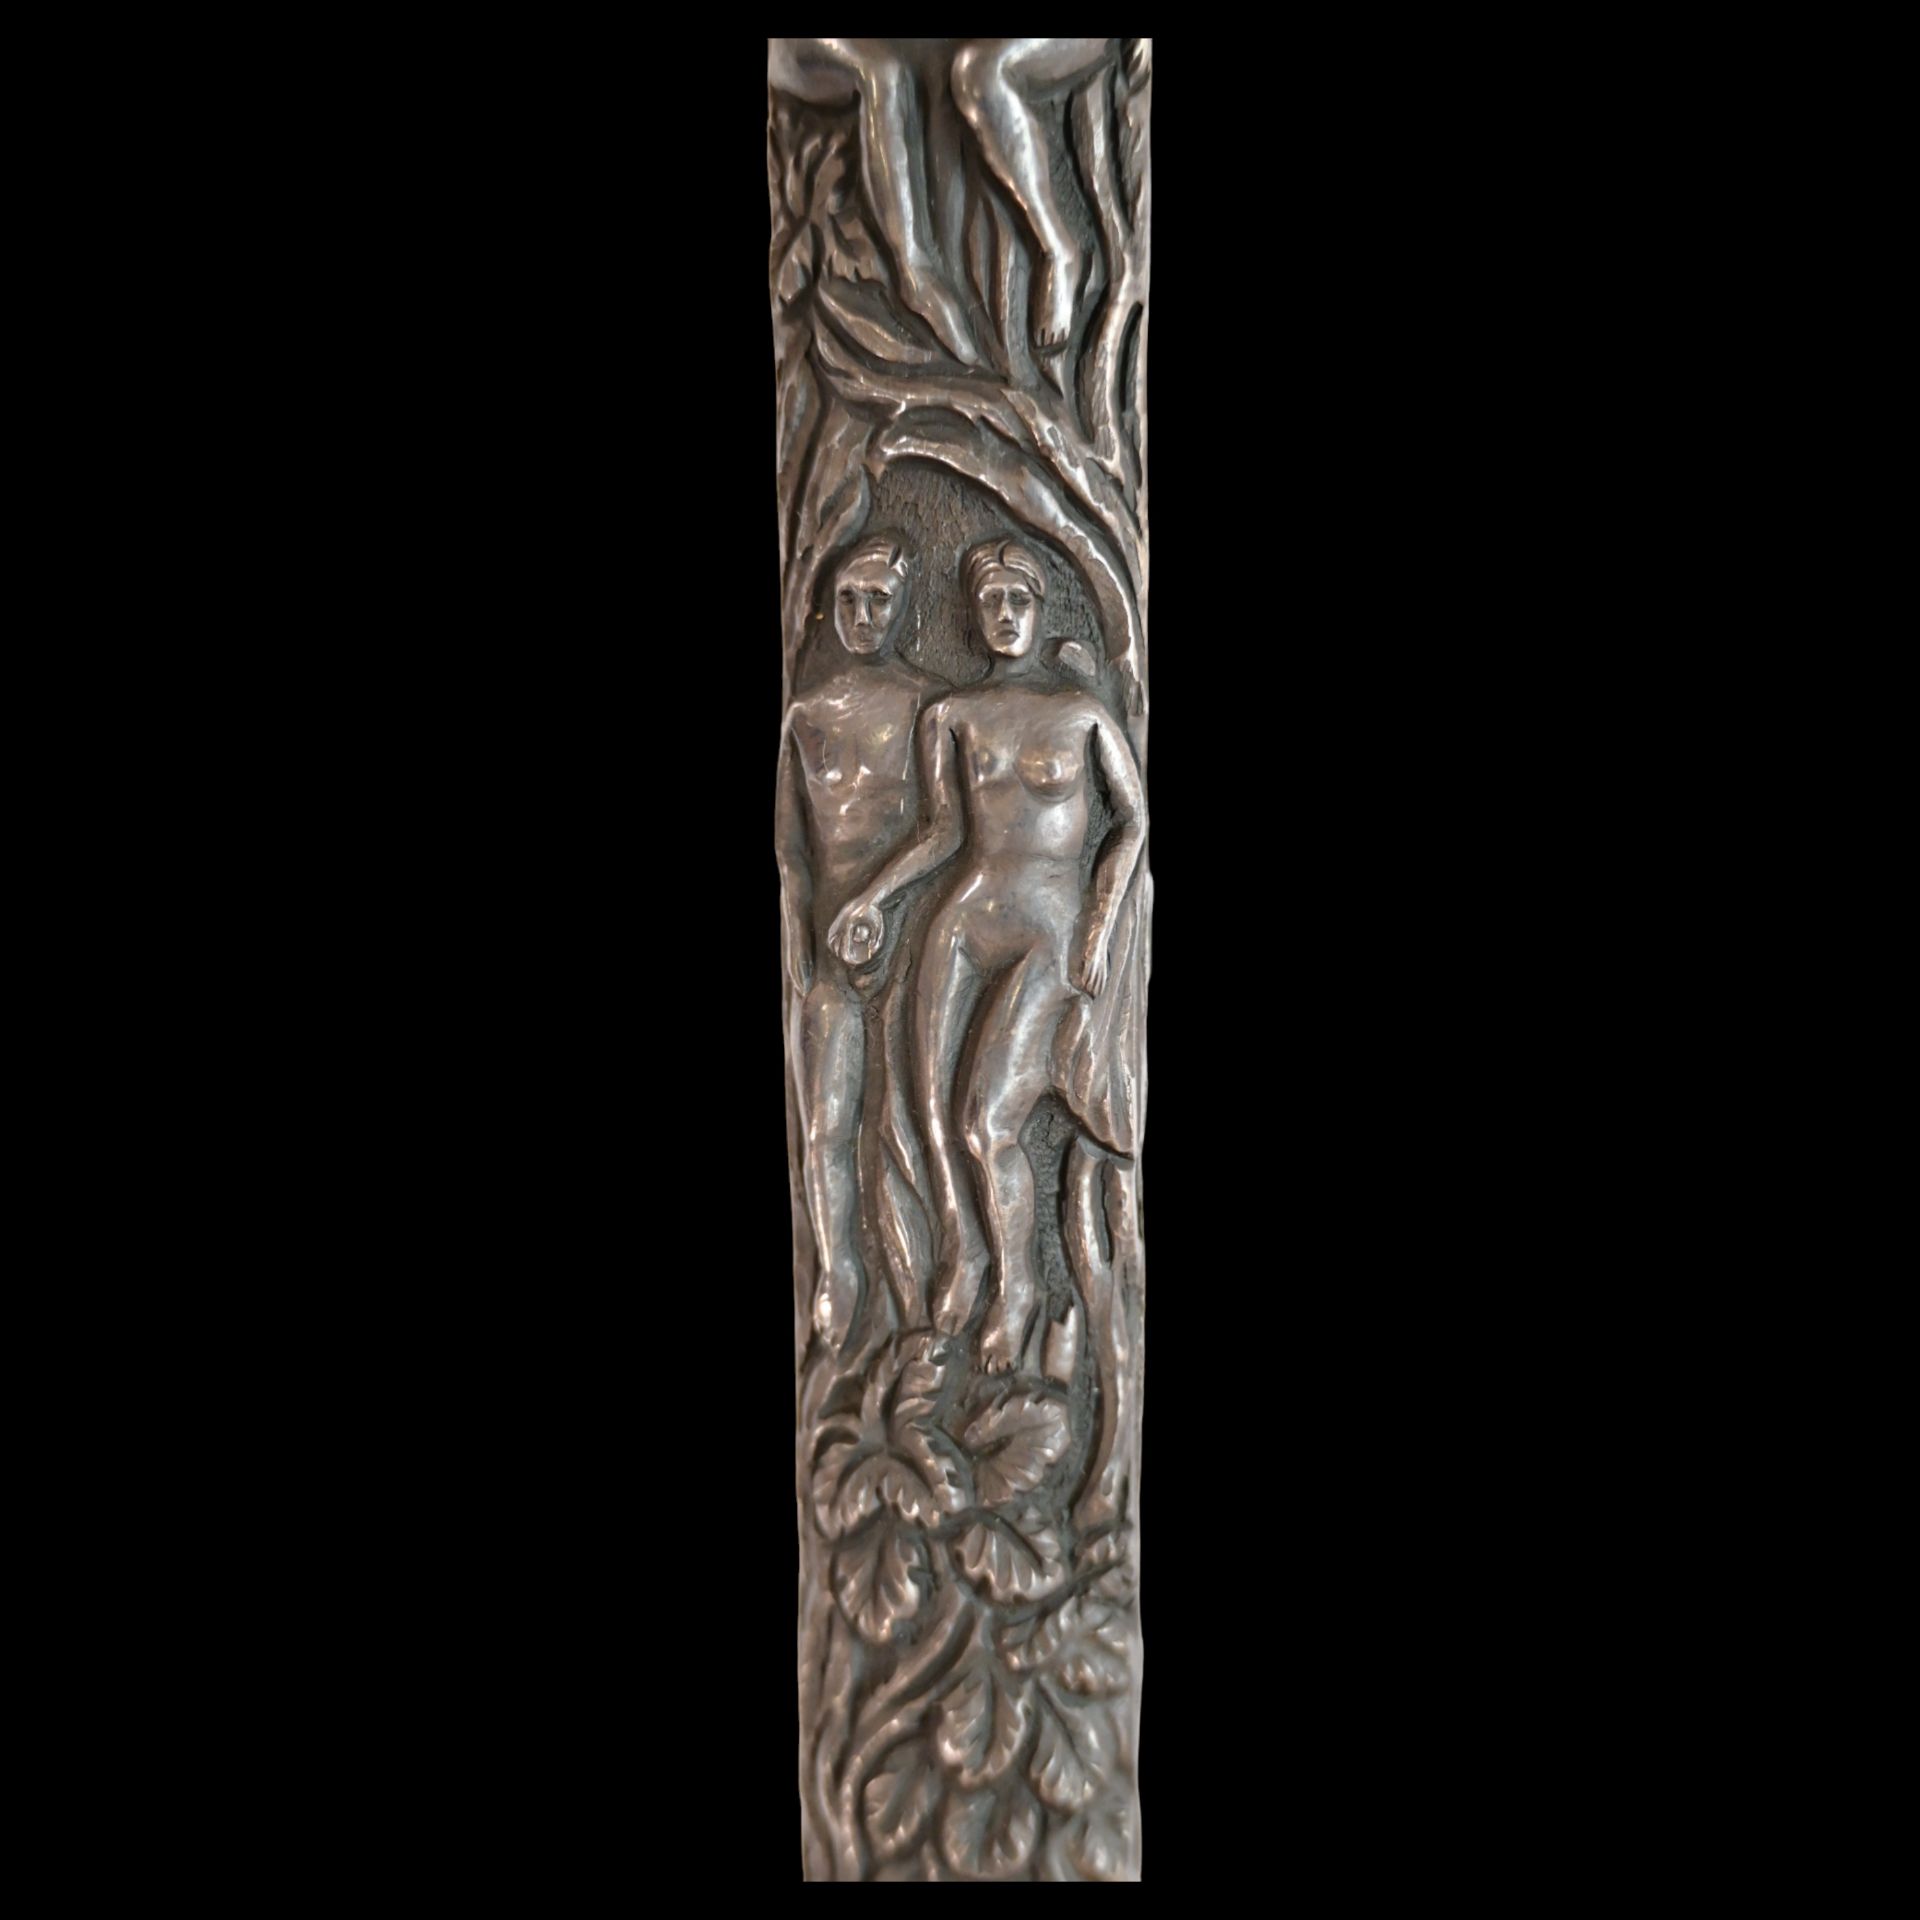 A fine French dagger with carved bone hilt and silver scabbard with erotic scenes, 19th century. - Image 10 of 14